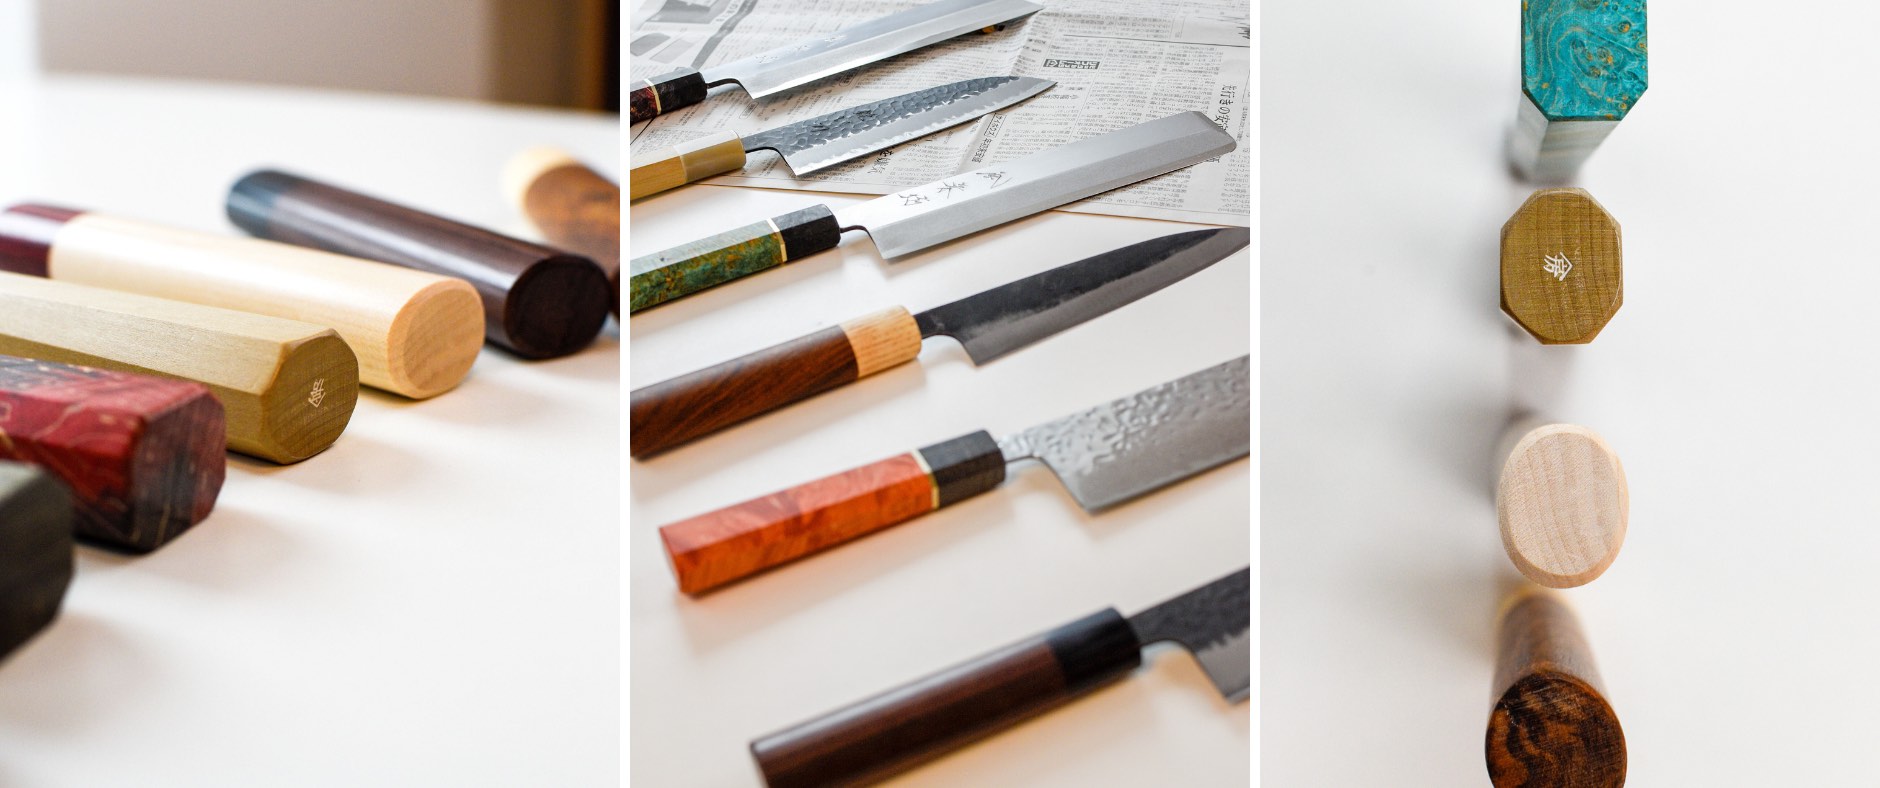 Japanese Knife Handles vs. Western Knife Handles – What’s the Difference?